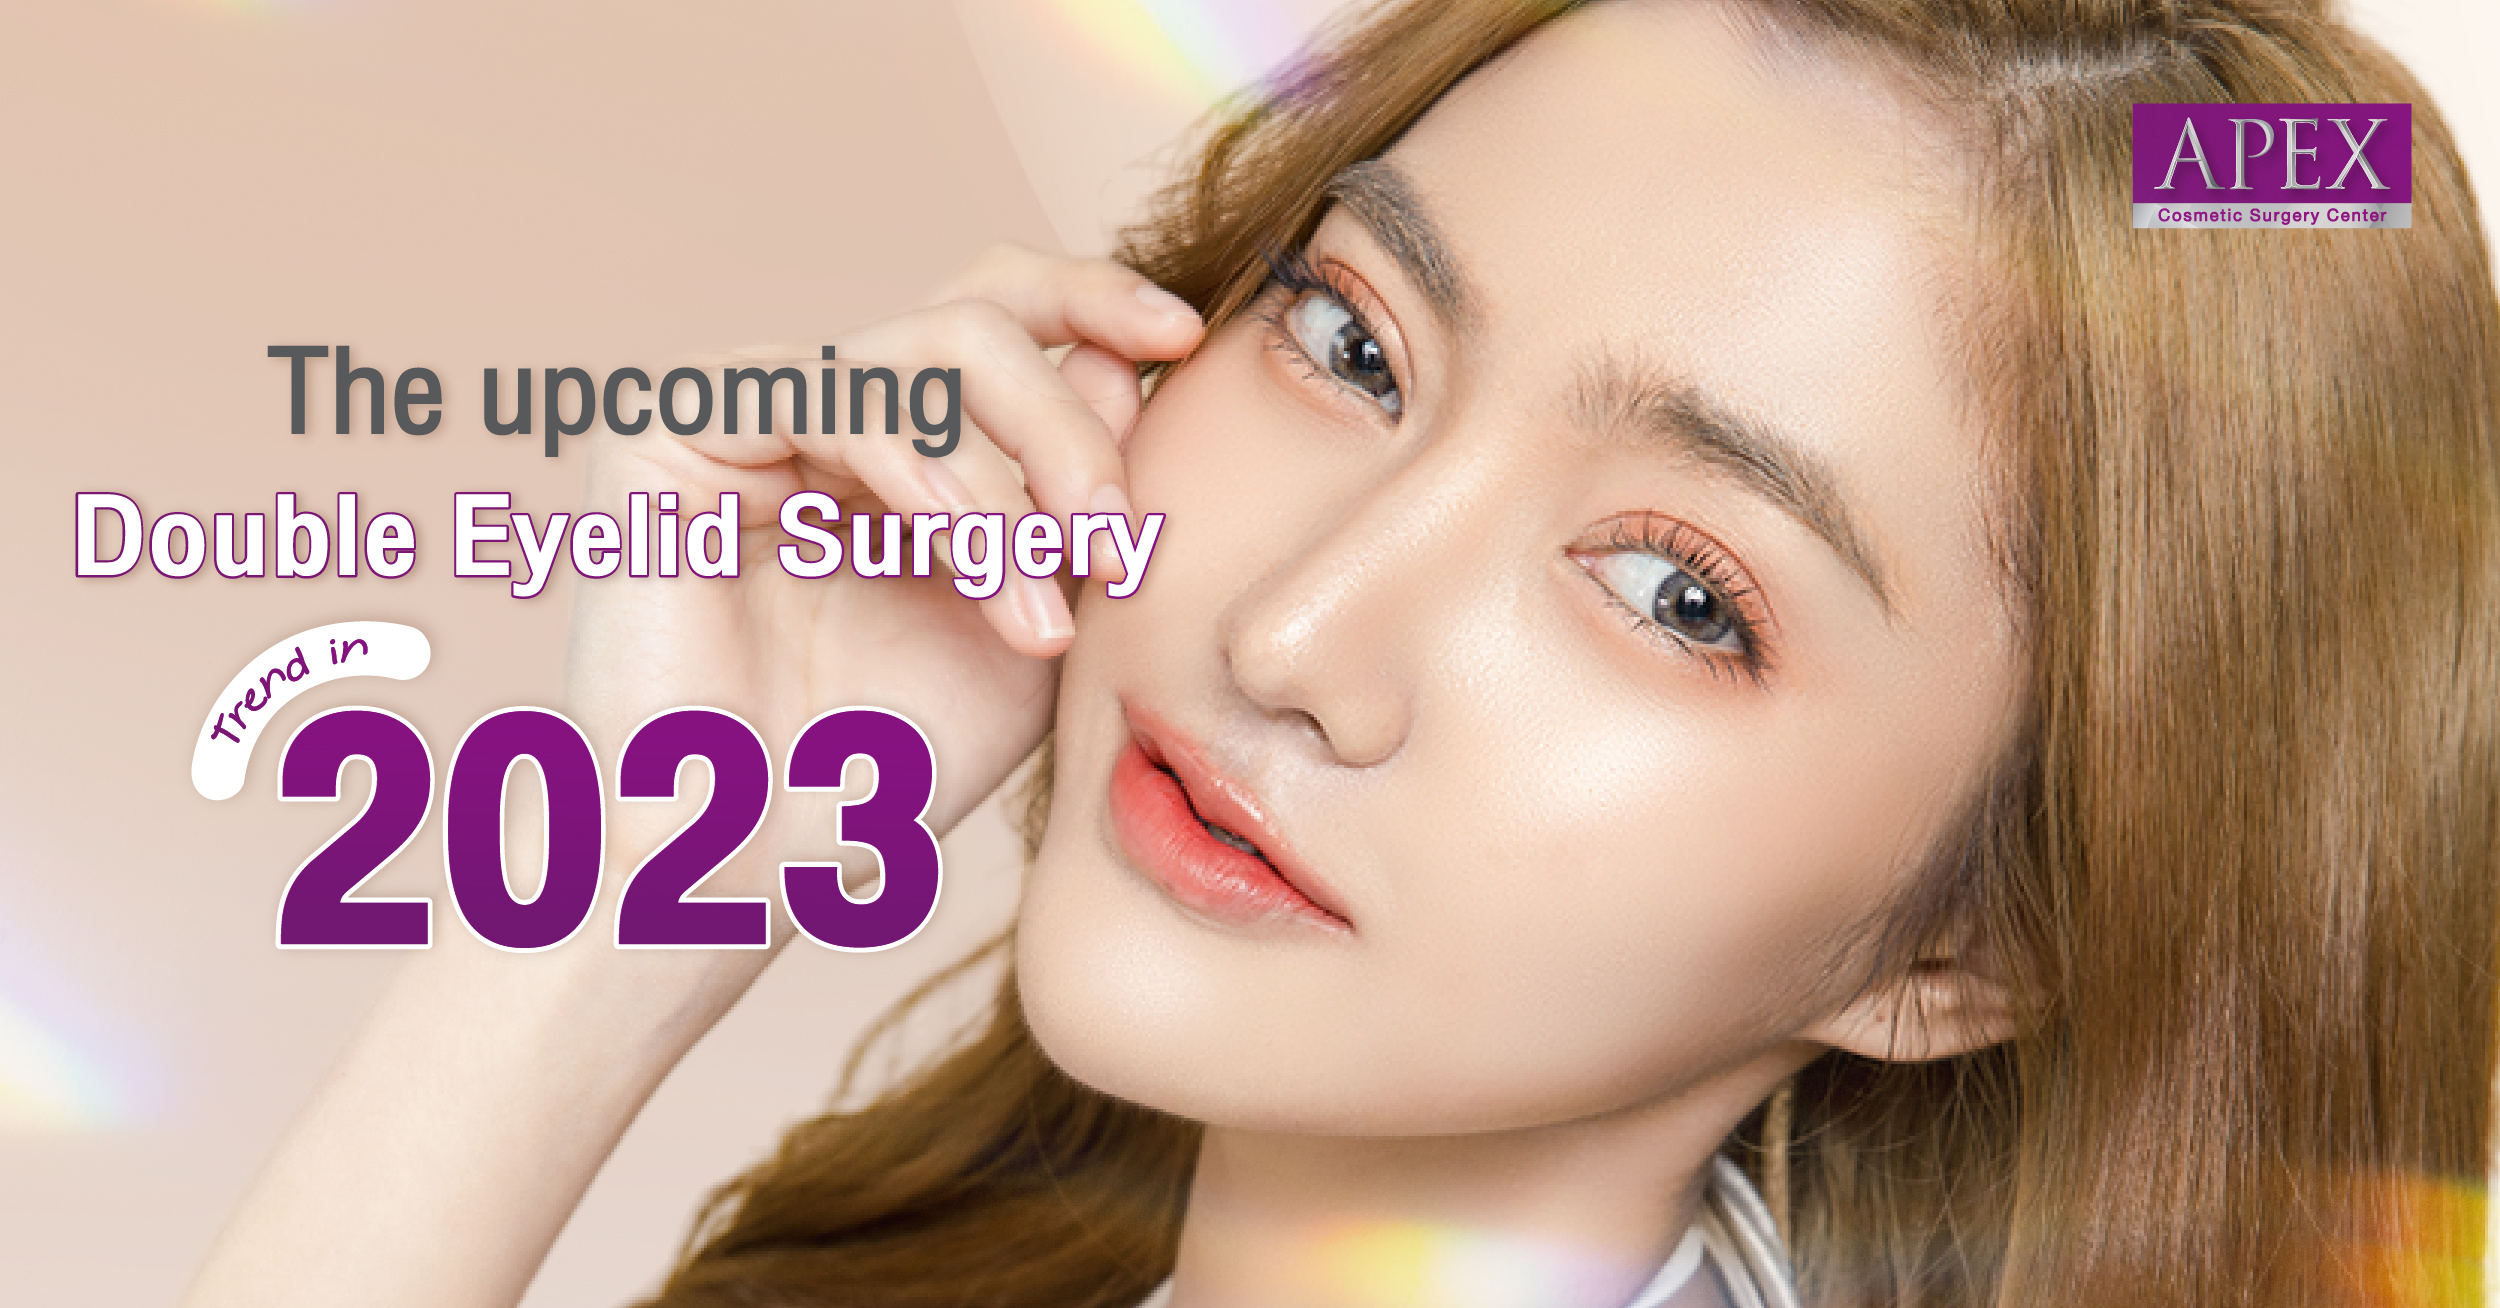 The upcoming double eyelid surgery trend in 2023